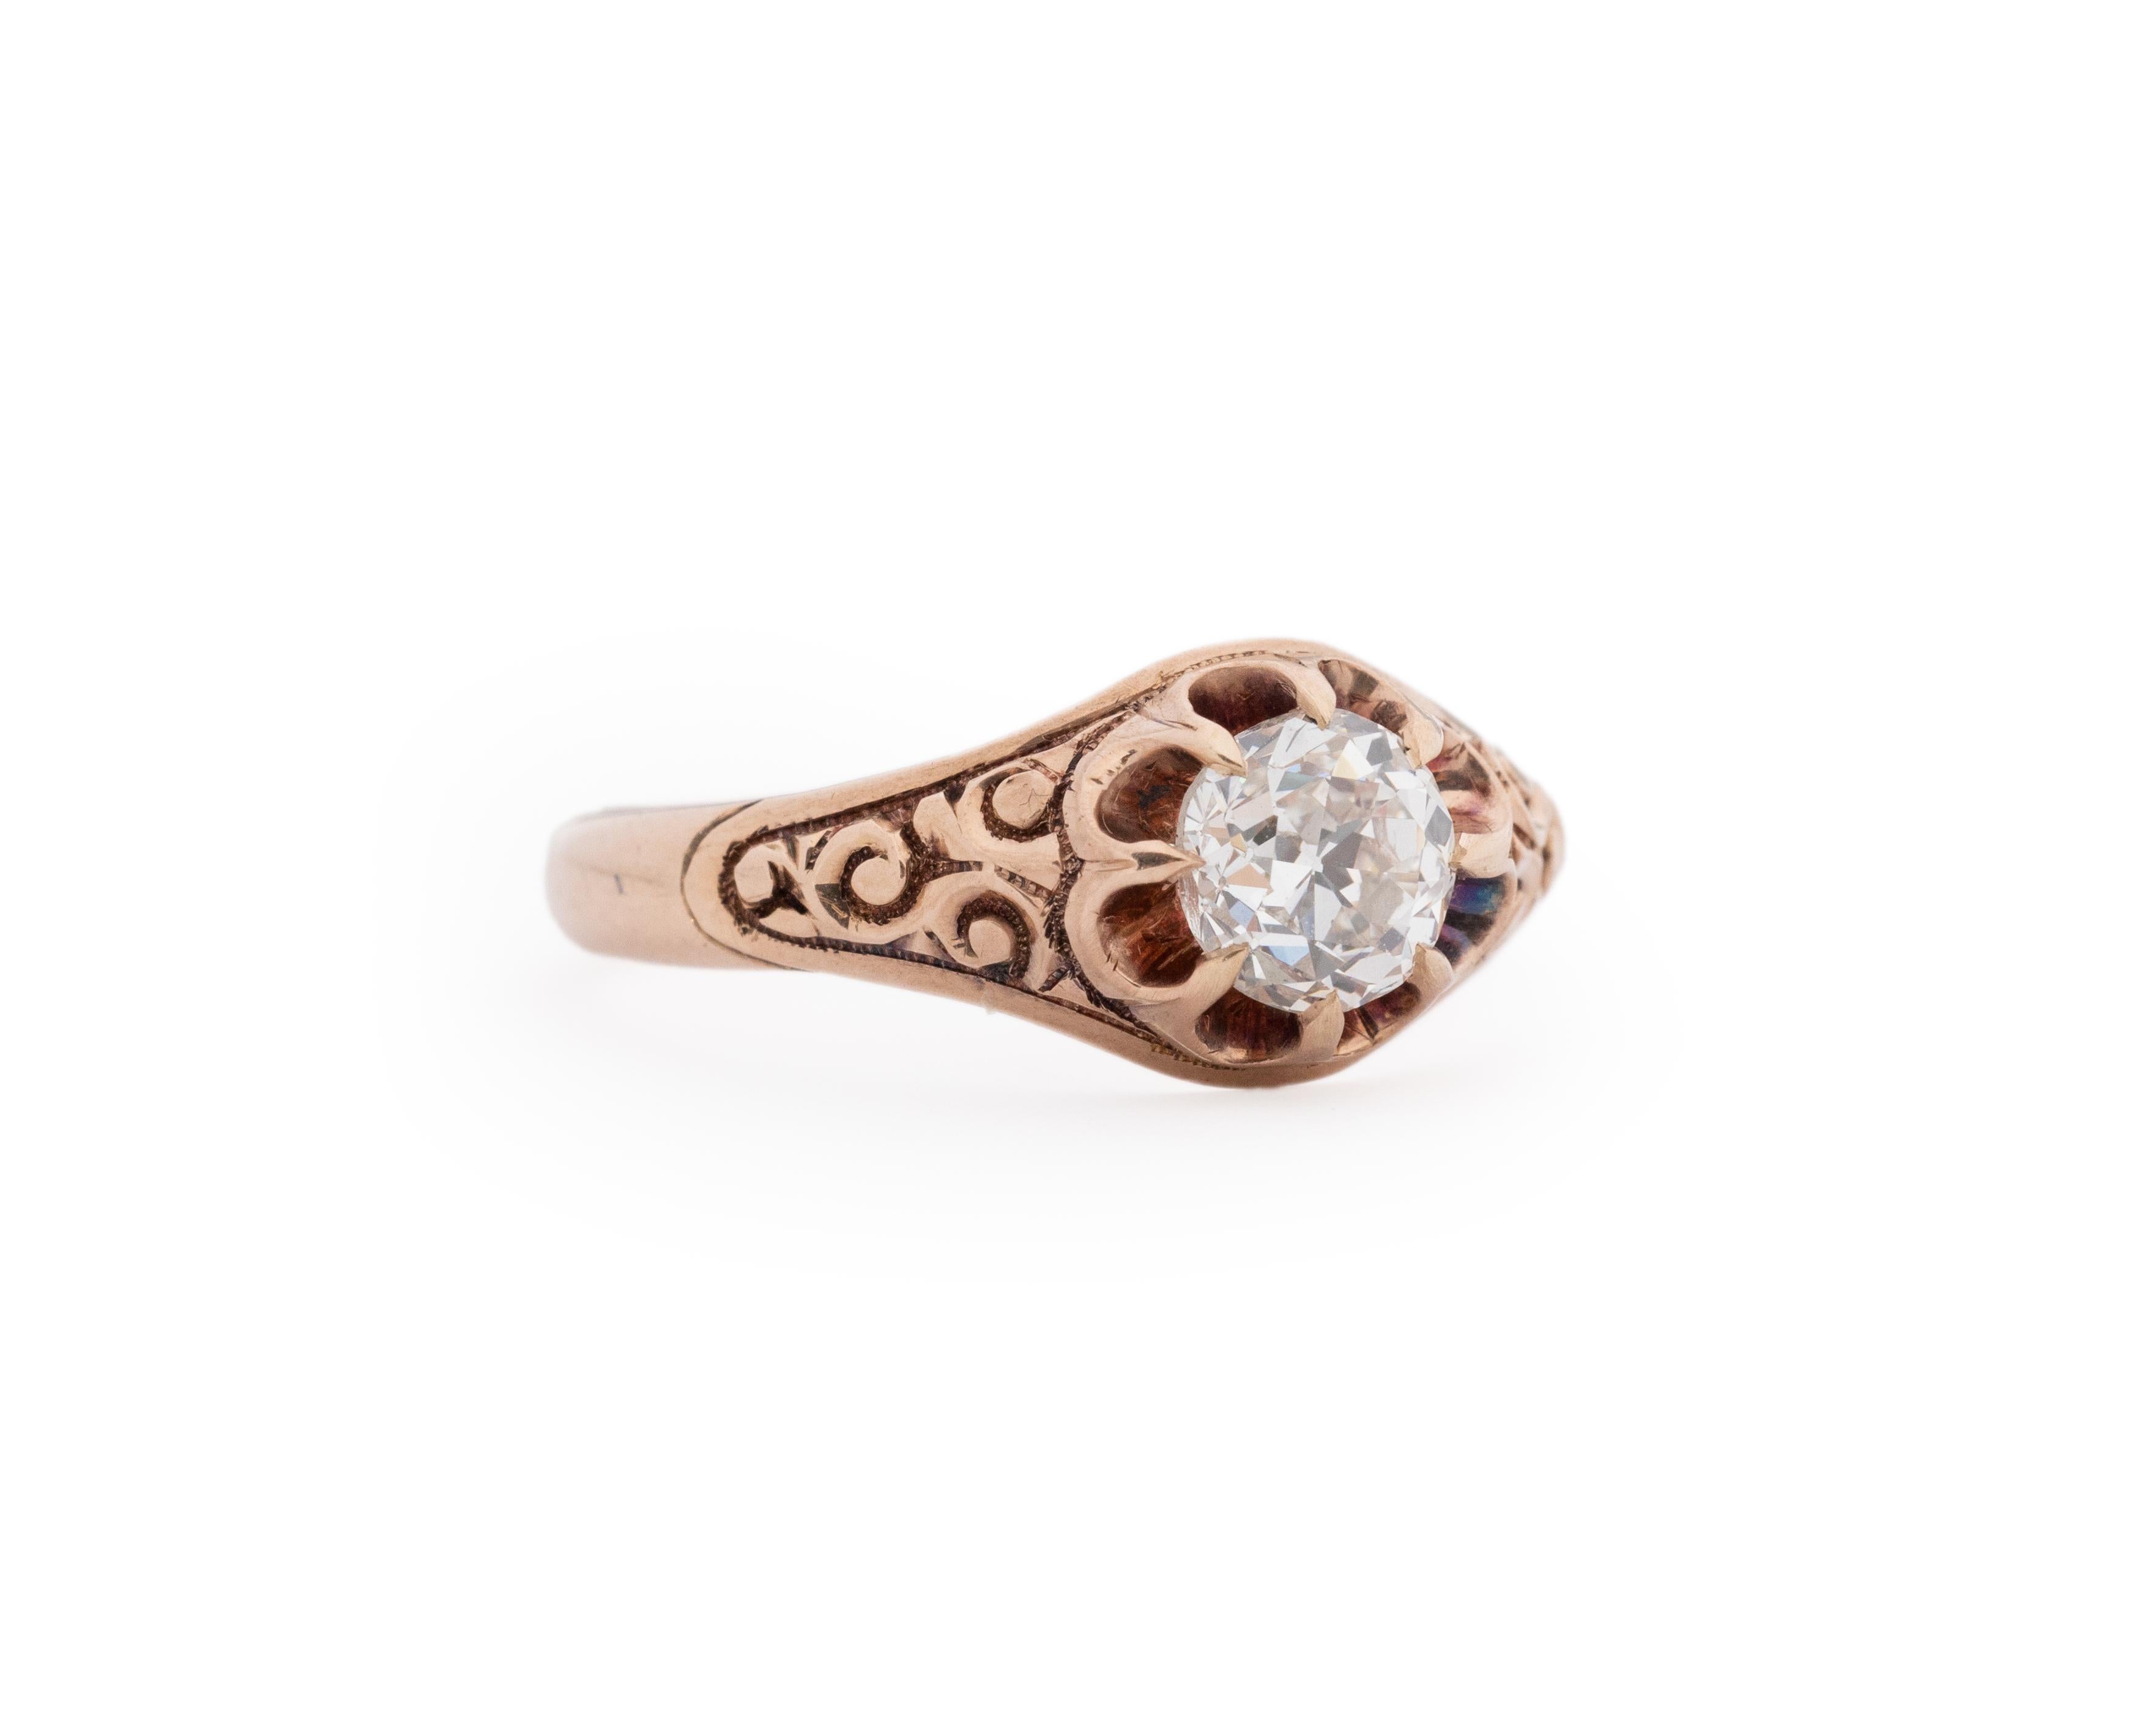 Year: 1900s

Item Details:
Ring Size: 6
Metal Type: 14K Yellow Gold [Hallmarked, and Tested]
Weight: 2.8 grams

Center Diamond Details:

GIA Report#:
Weight: .78ct total weight
Cut: Old European brilliant
Color: J
Clarity: SI1
Type: Natural

Finger